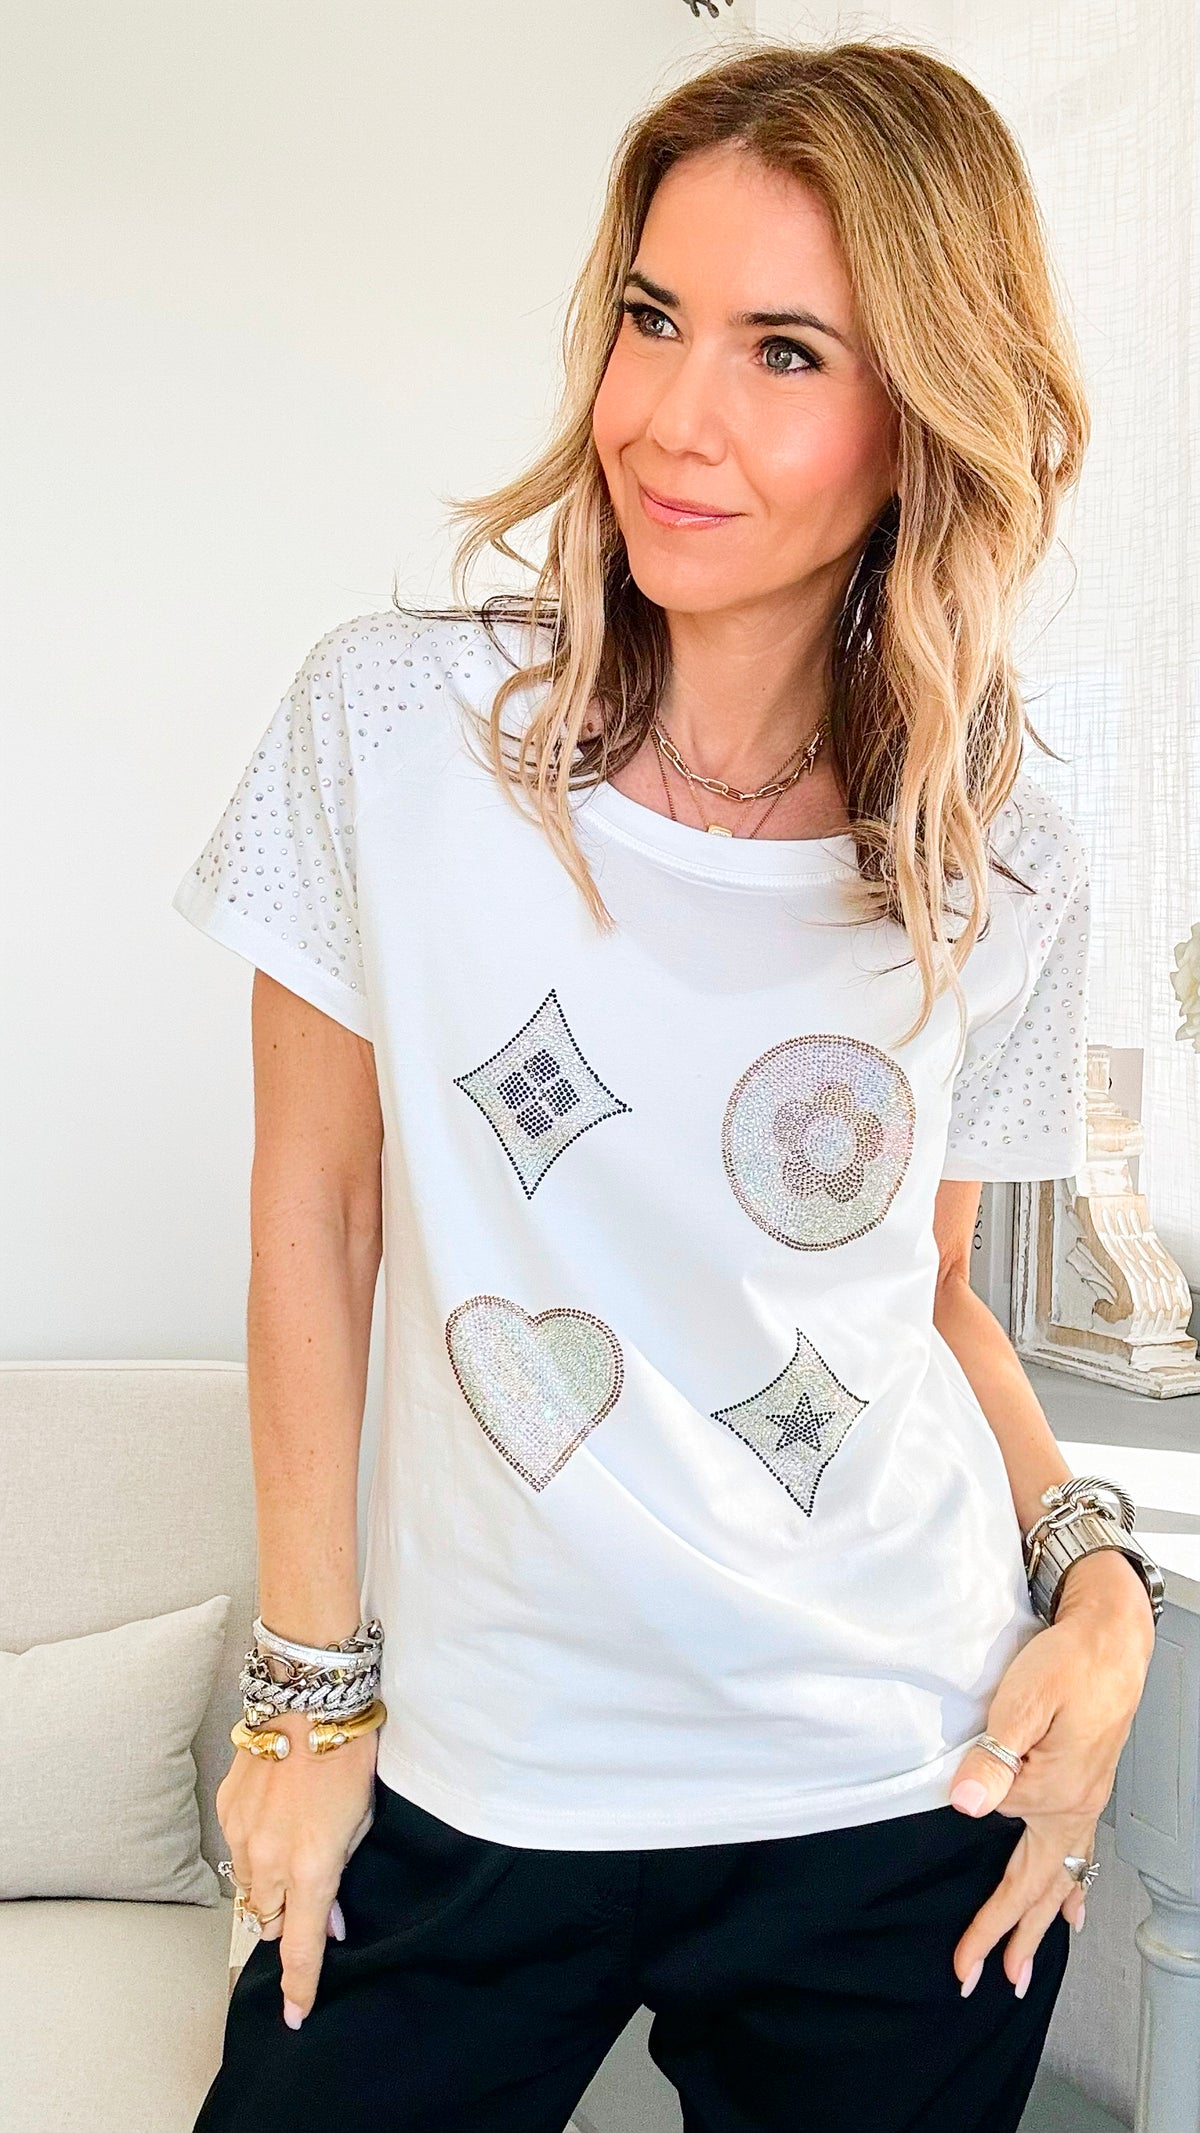 Clover and Flower Rhinestone Graphic Top - White-110 Short Sleeve Tops-in2you-Coastal Bloom Boutique, find the trendiest versions of the popular styles and looks Located in Indialantic, FL